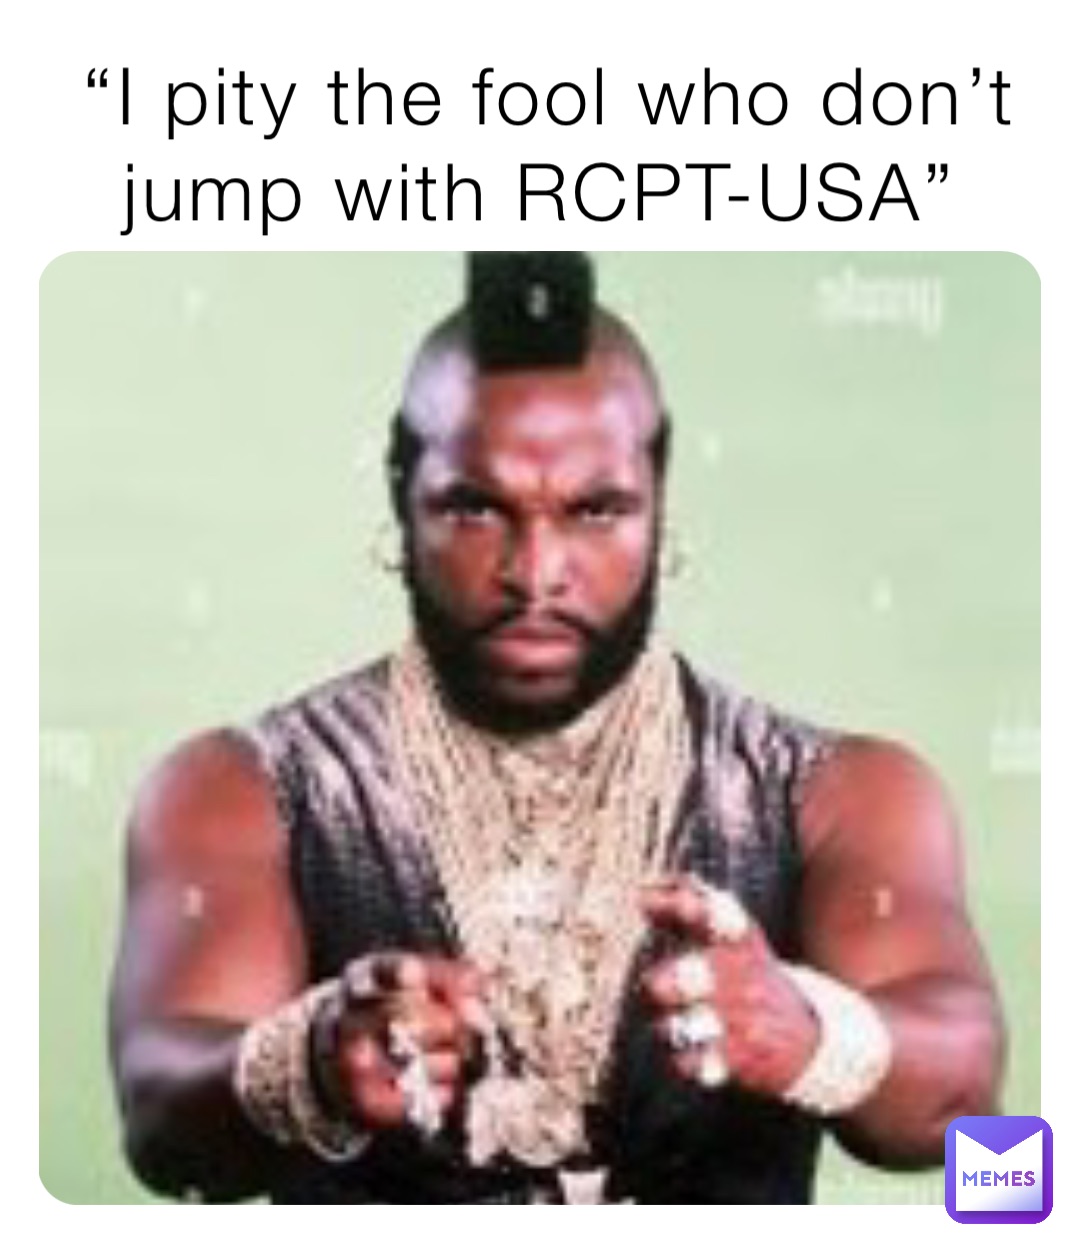 “I pity the fool who don’t jump with RCPT-USA”